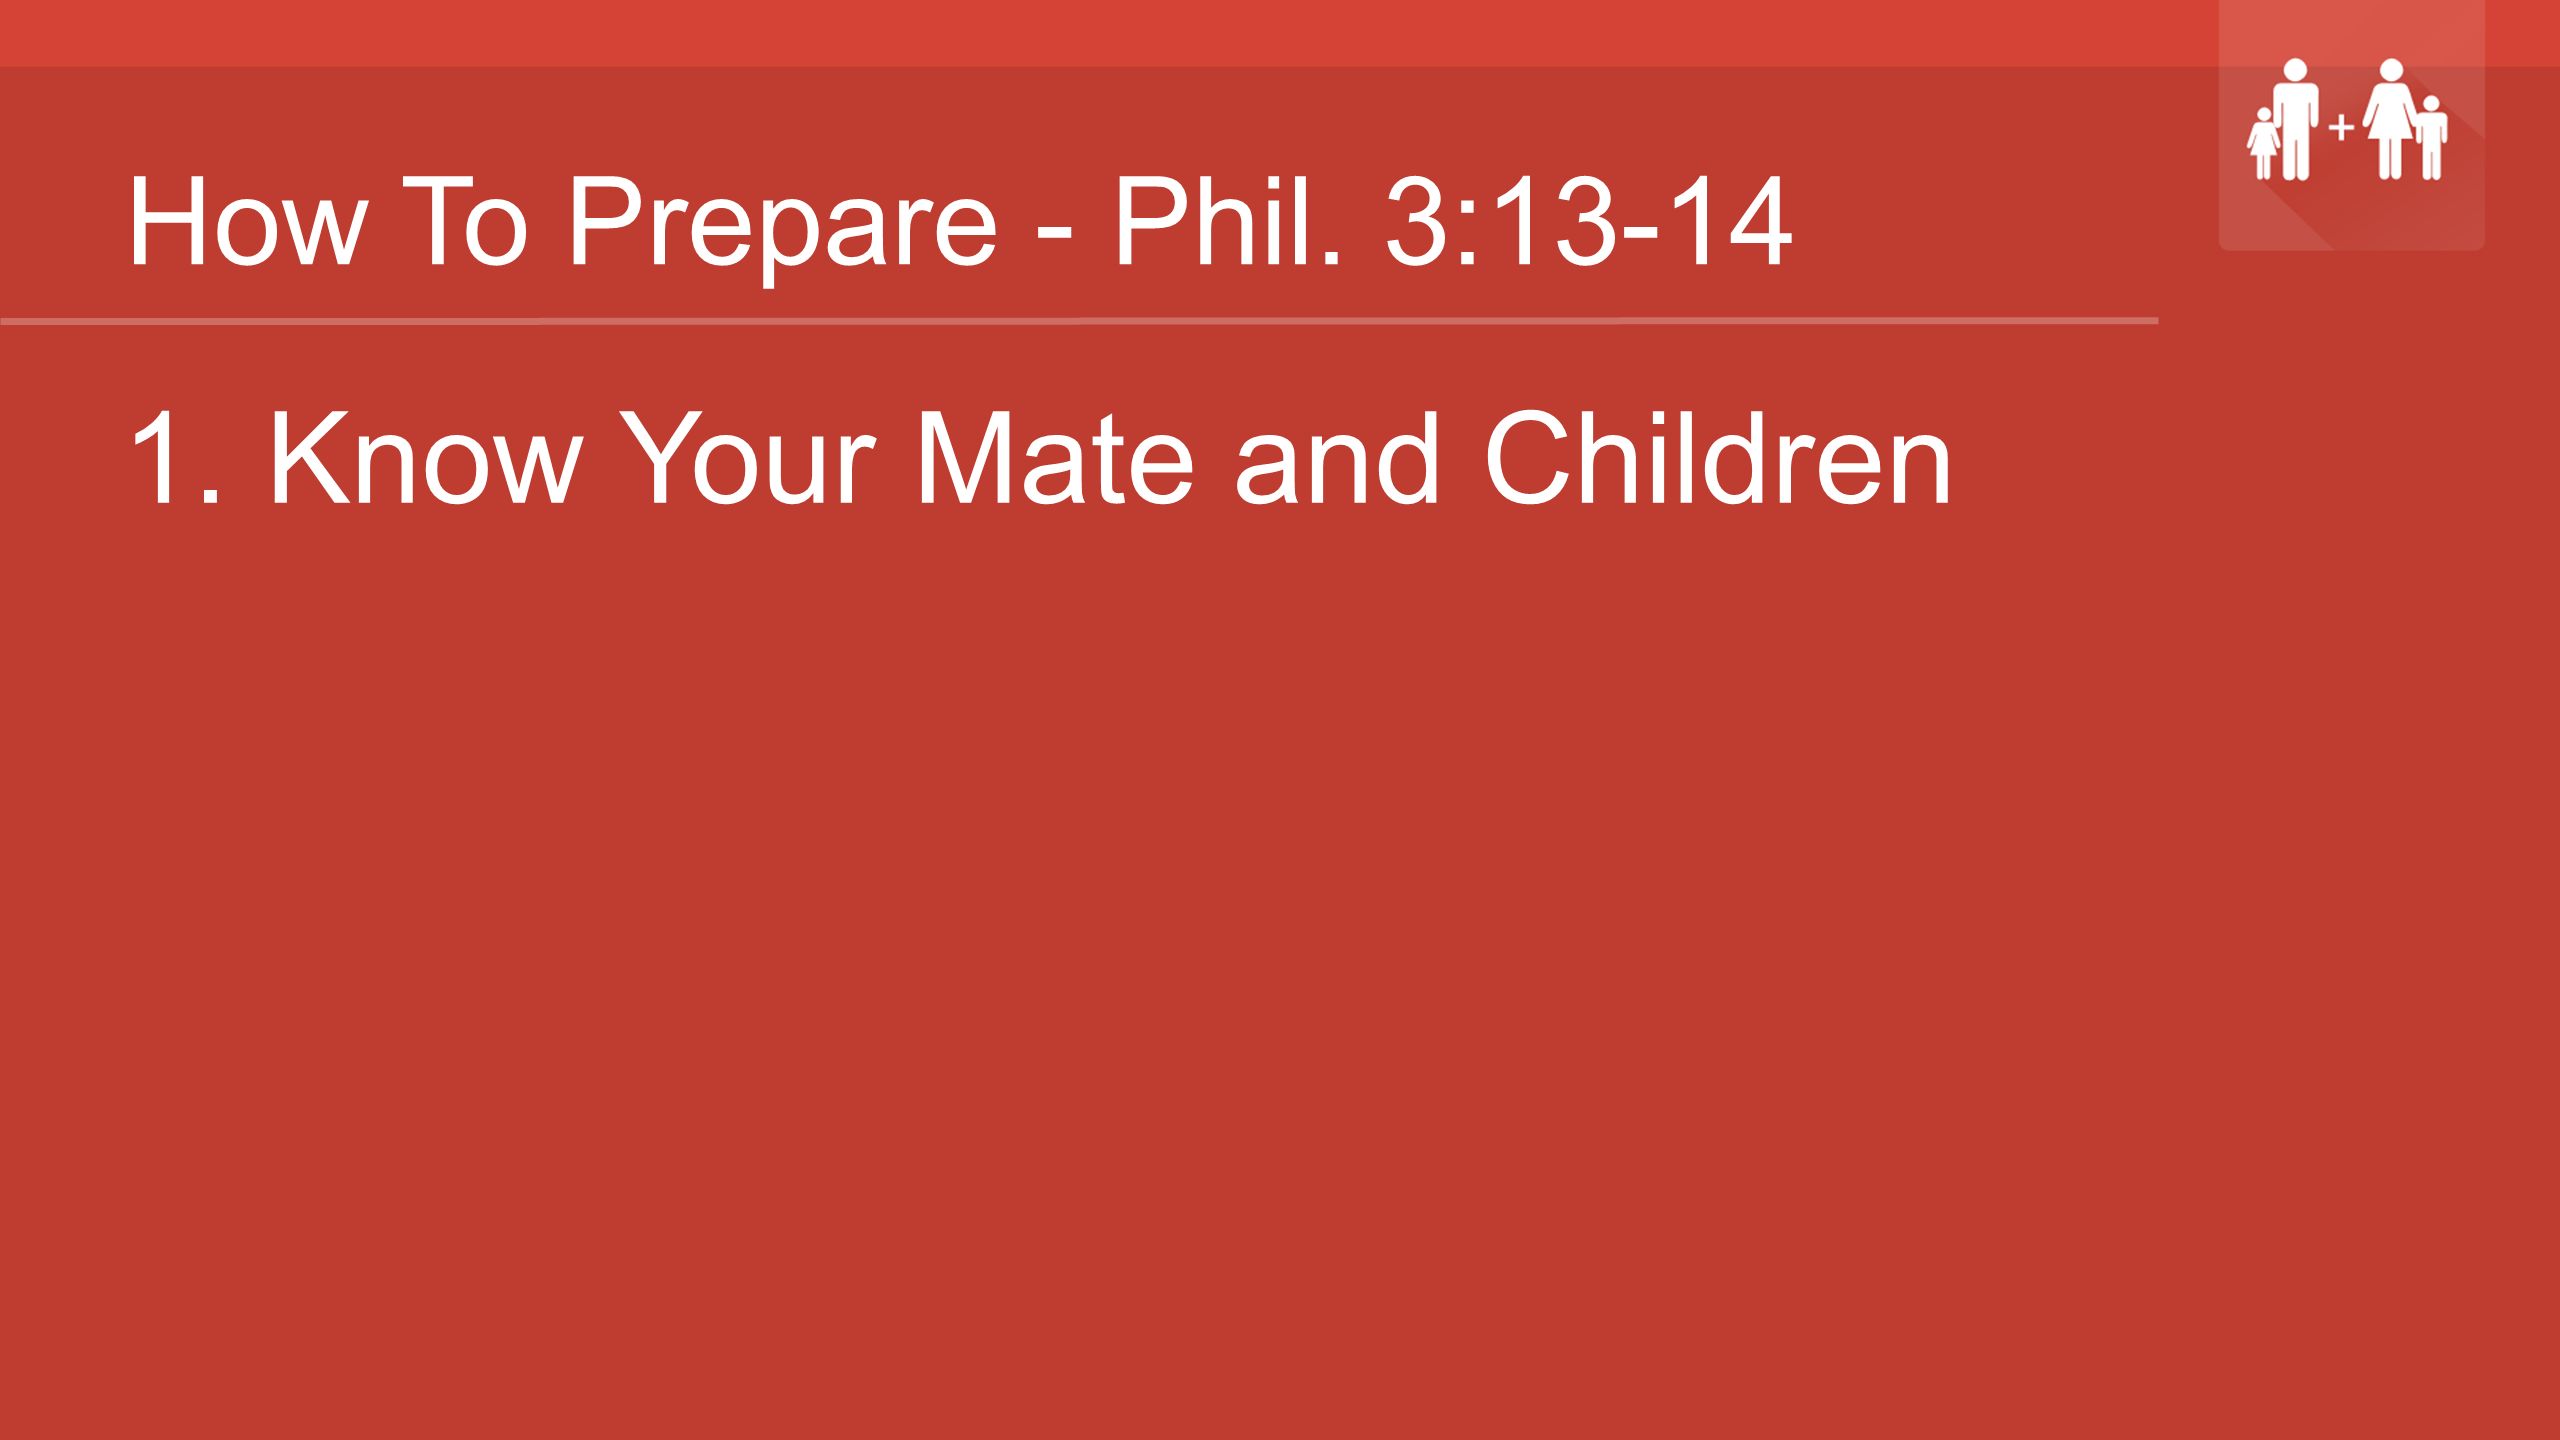 How To Prepare - Phil. 3: Know Your Mate and Children